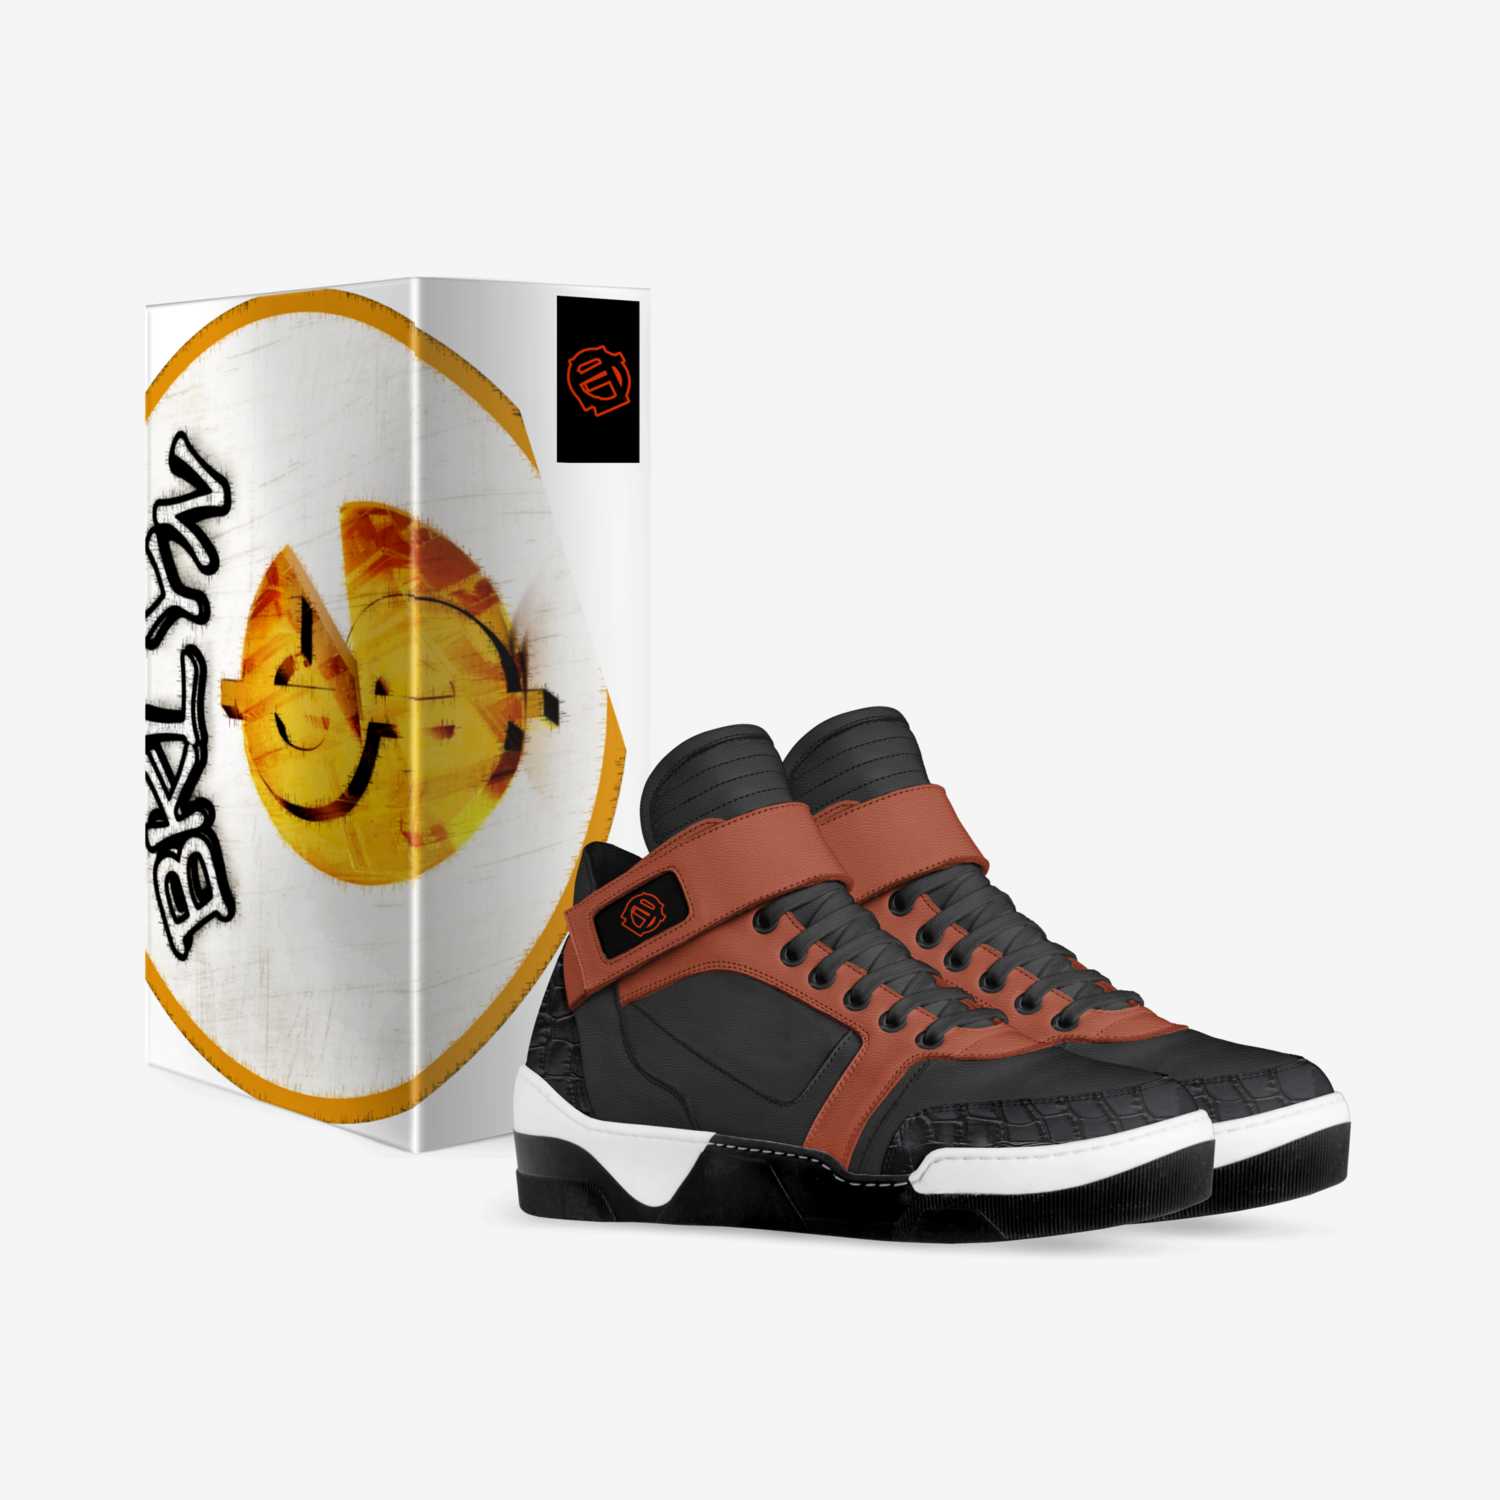 LOE BBall/BKLYN custom made in Italy shoes by Jamar Fludd | Box view